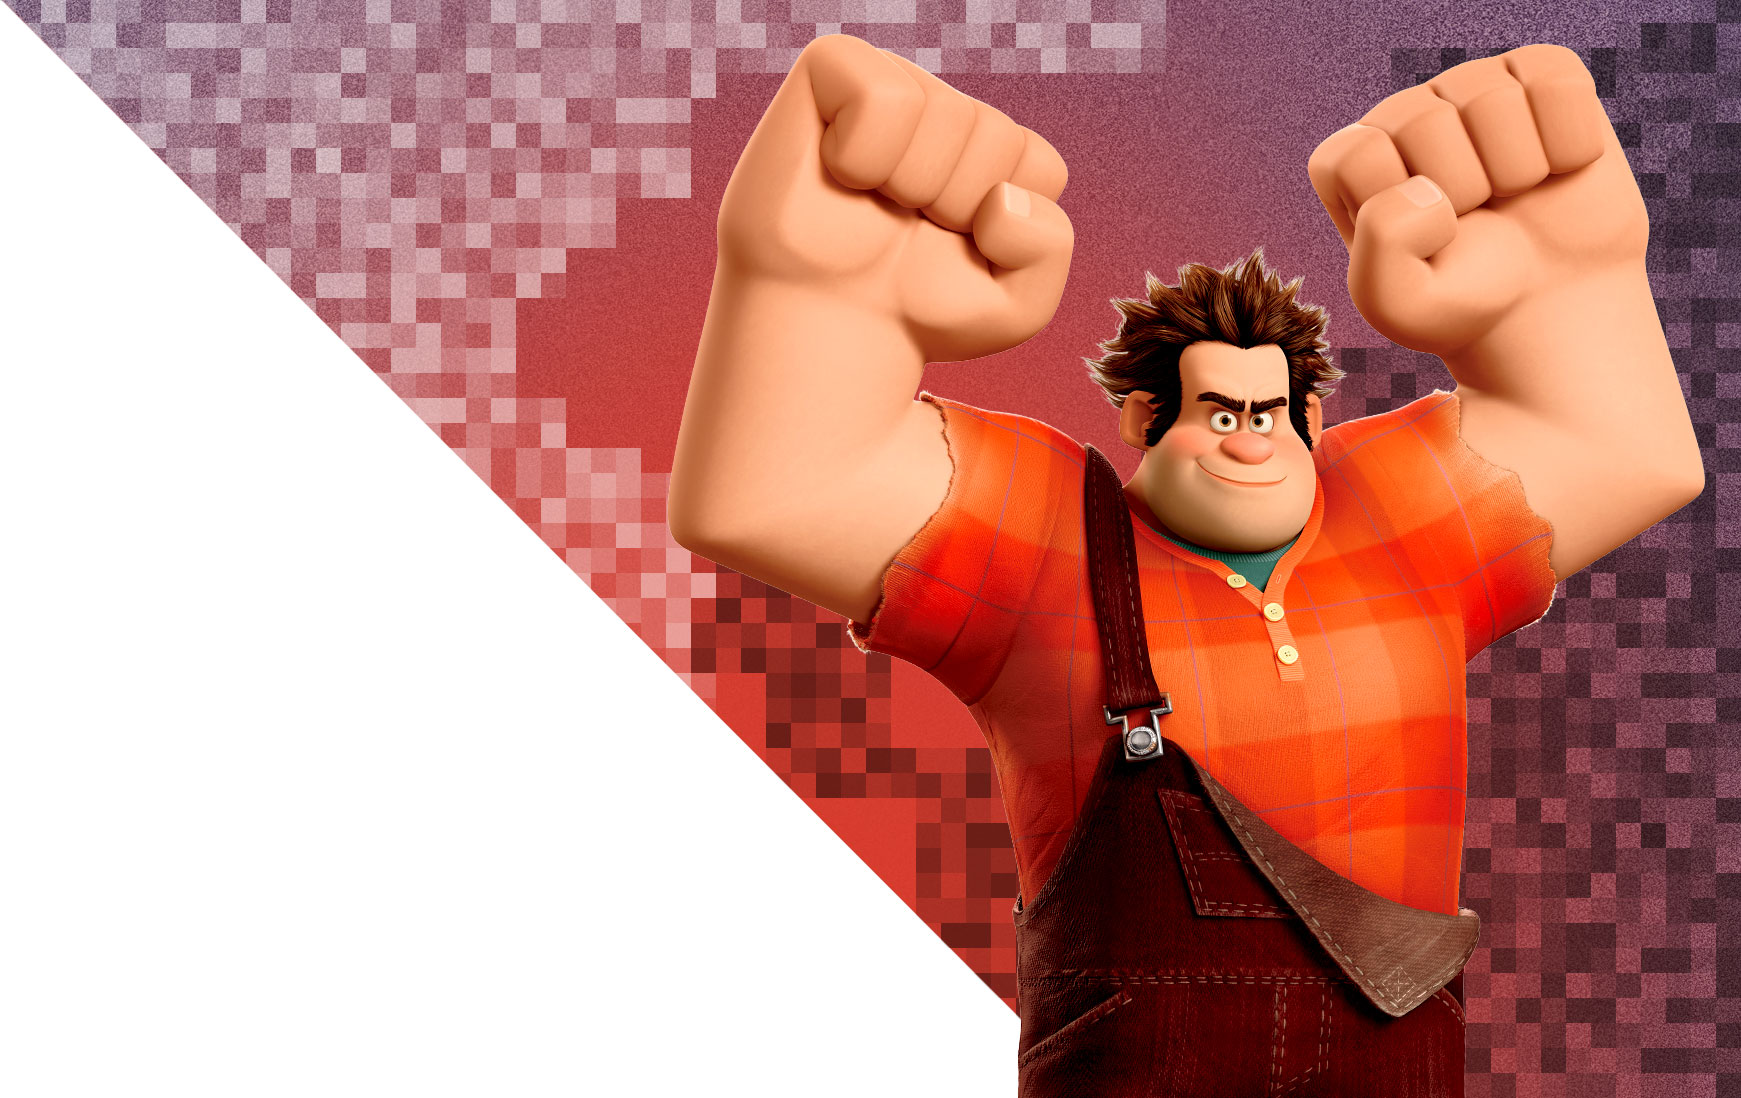 John C. Reilly gets animated in “Wreck-It Ralph” – The Oakland Press